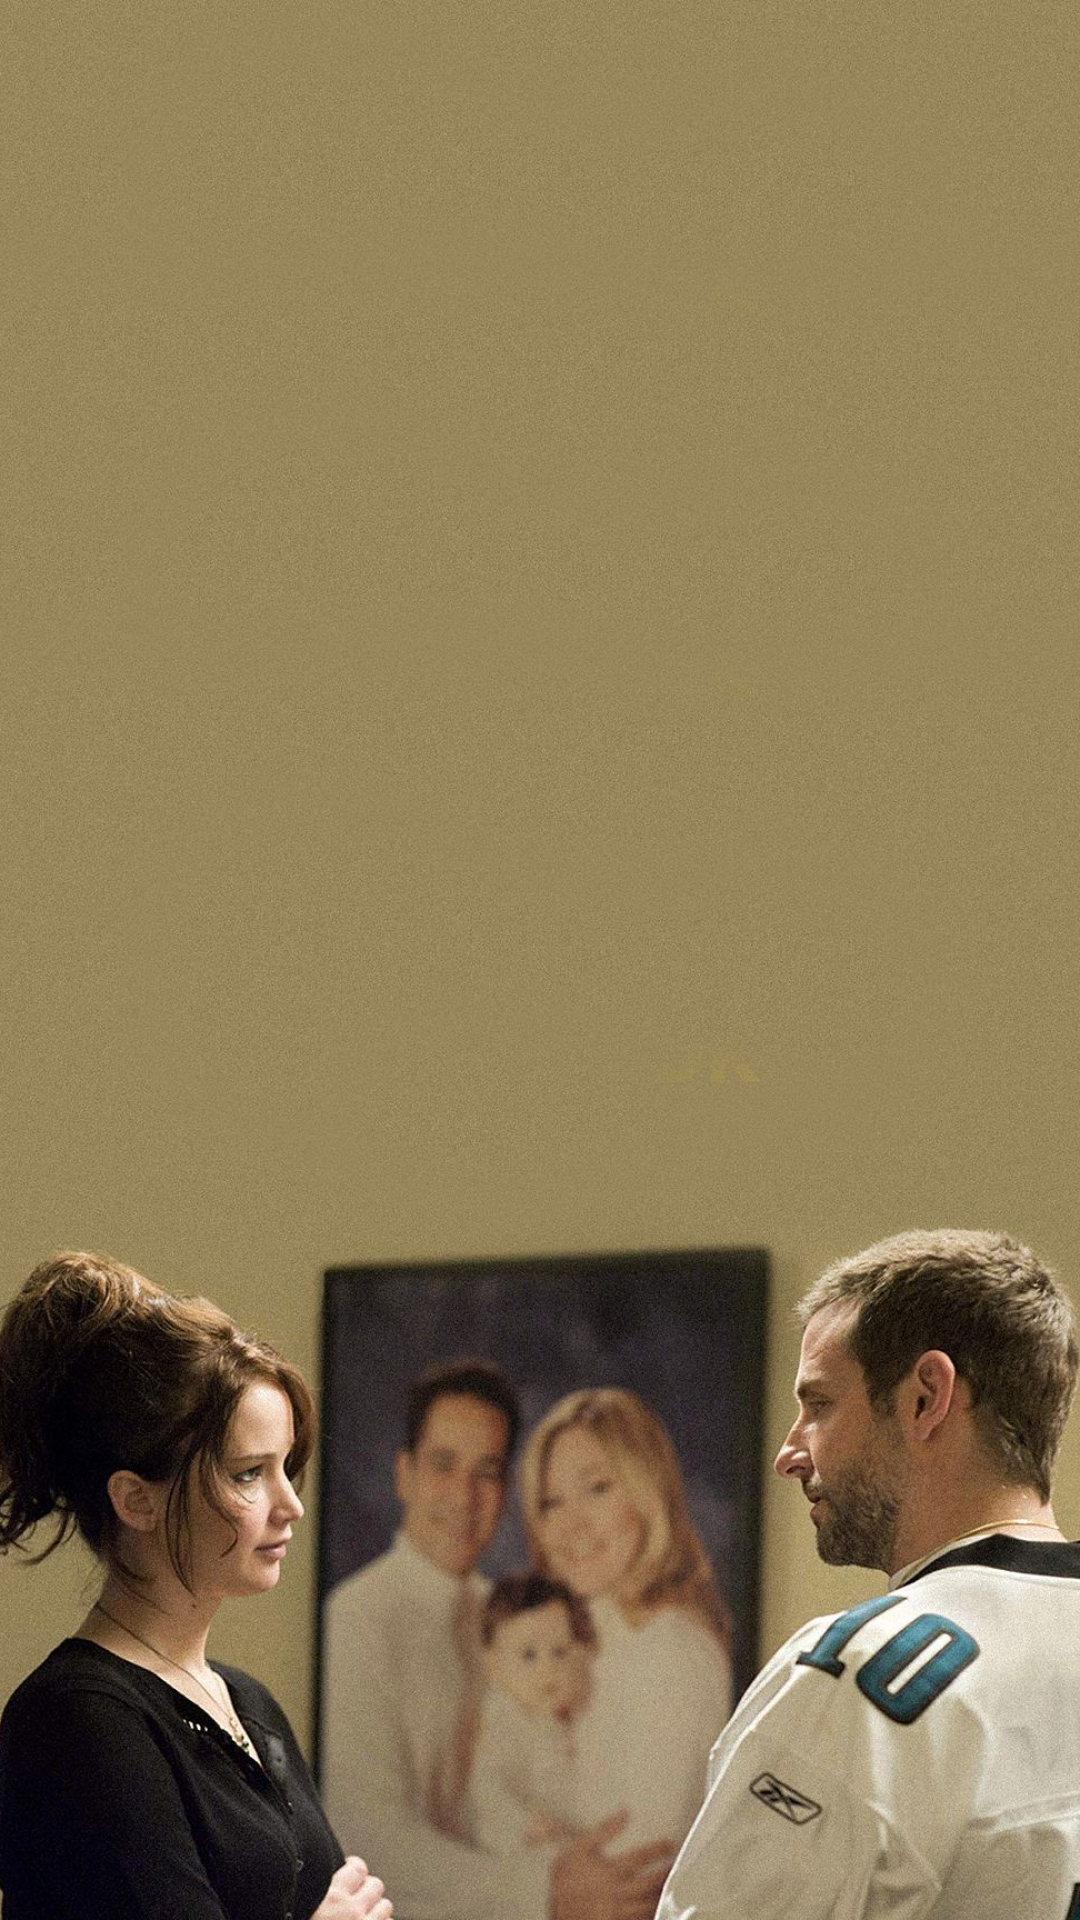 Silver Linings Playbook, Captivating Android wallpaper, Artful poster design, Modern cinematic masterpiece, 1080x1920 Full HD Handy